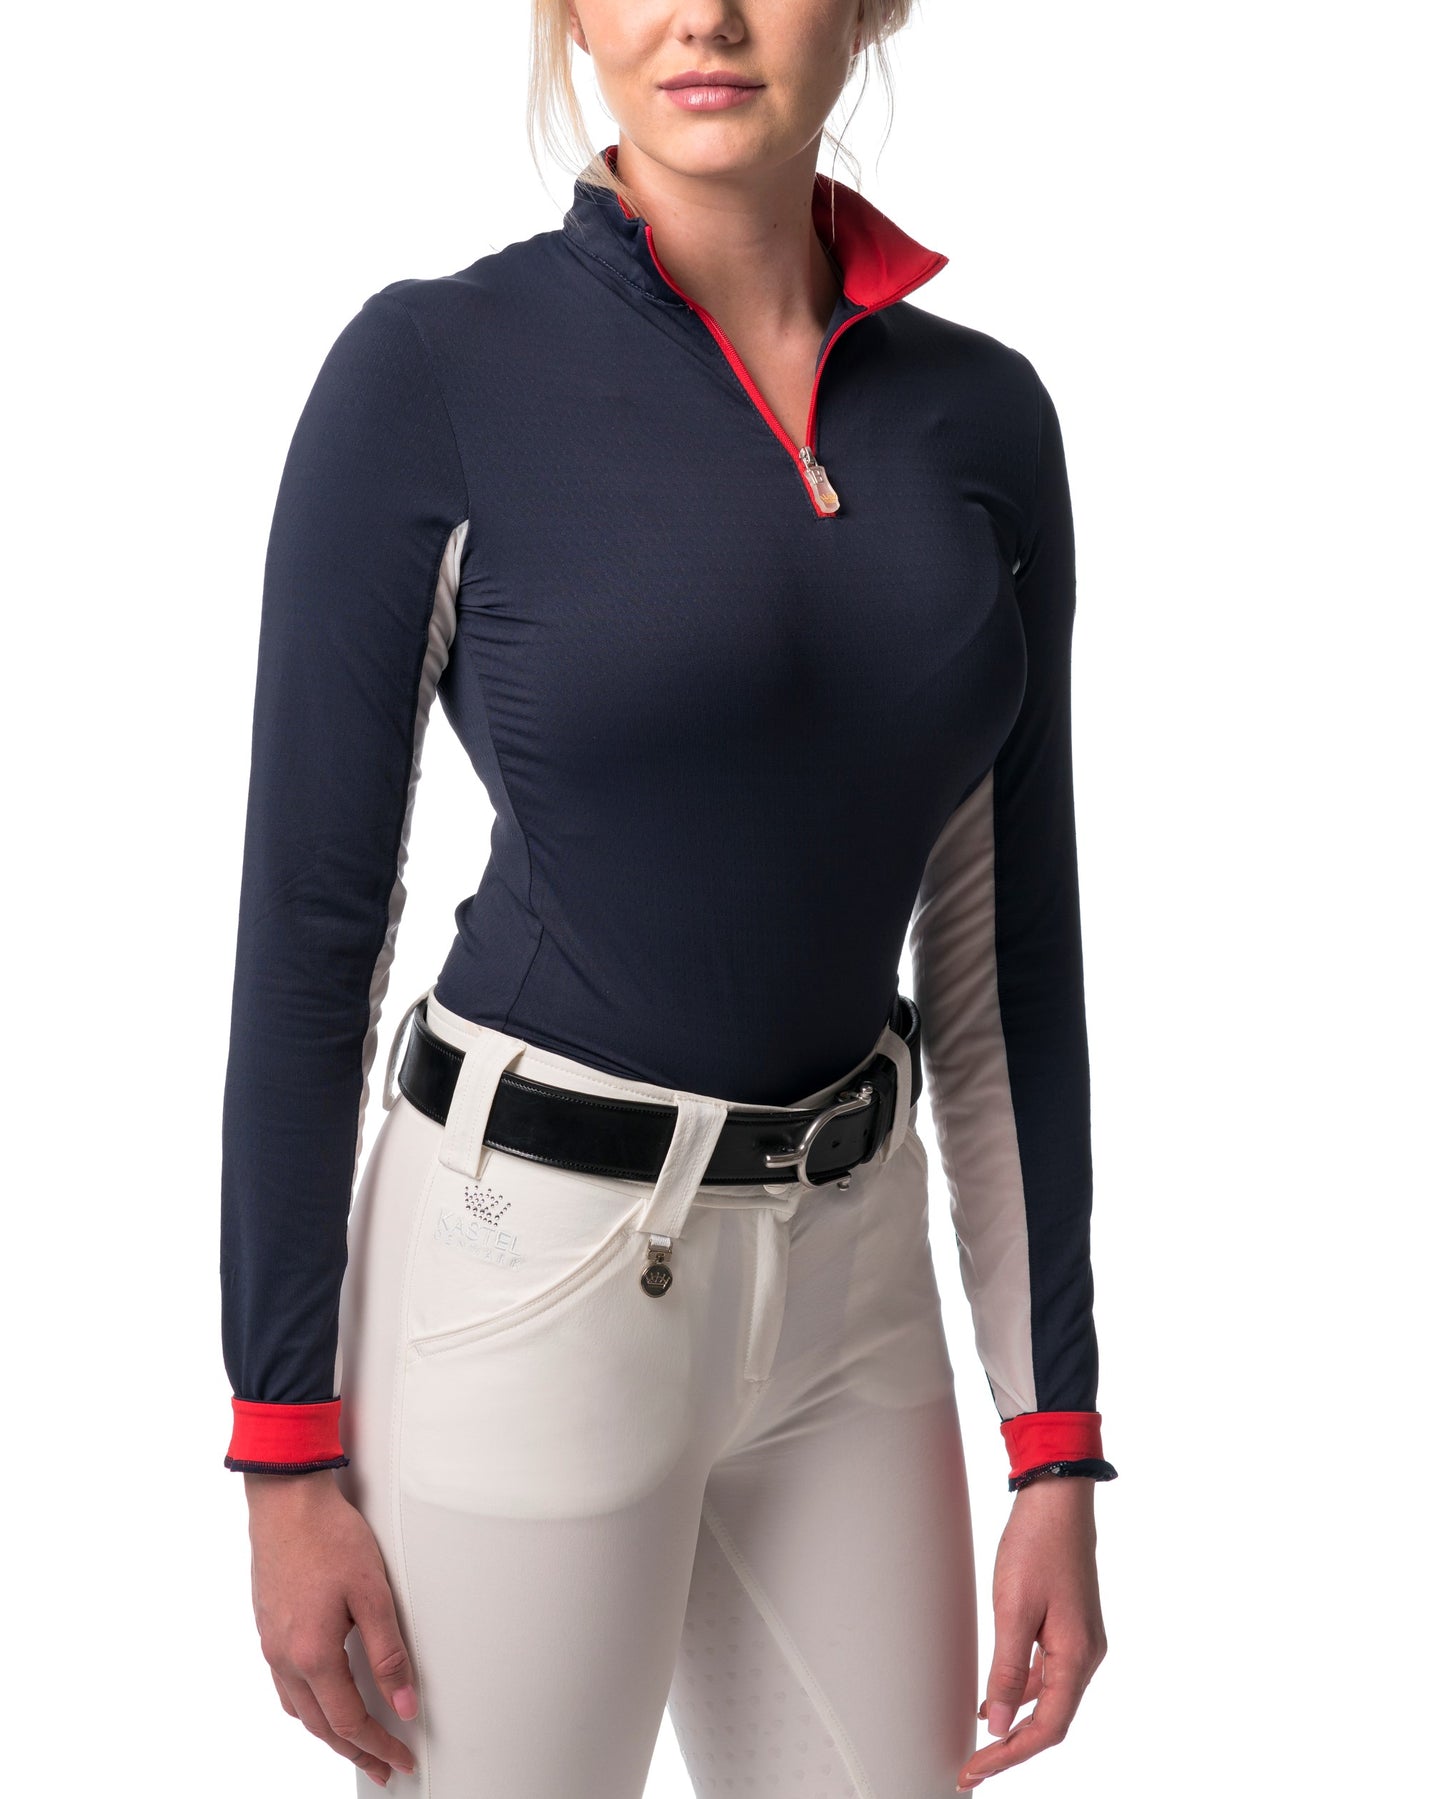 Kastel Denmark Navy Blue with Red Trim Long Sleeve - Equiluxe Tack